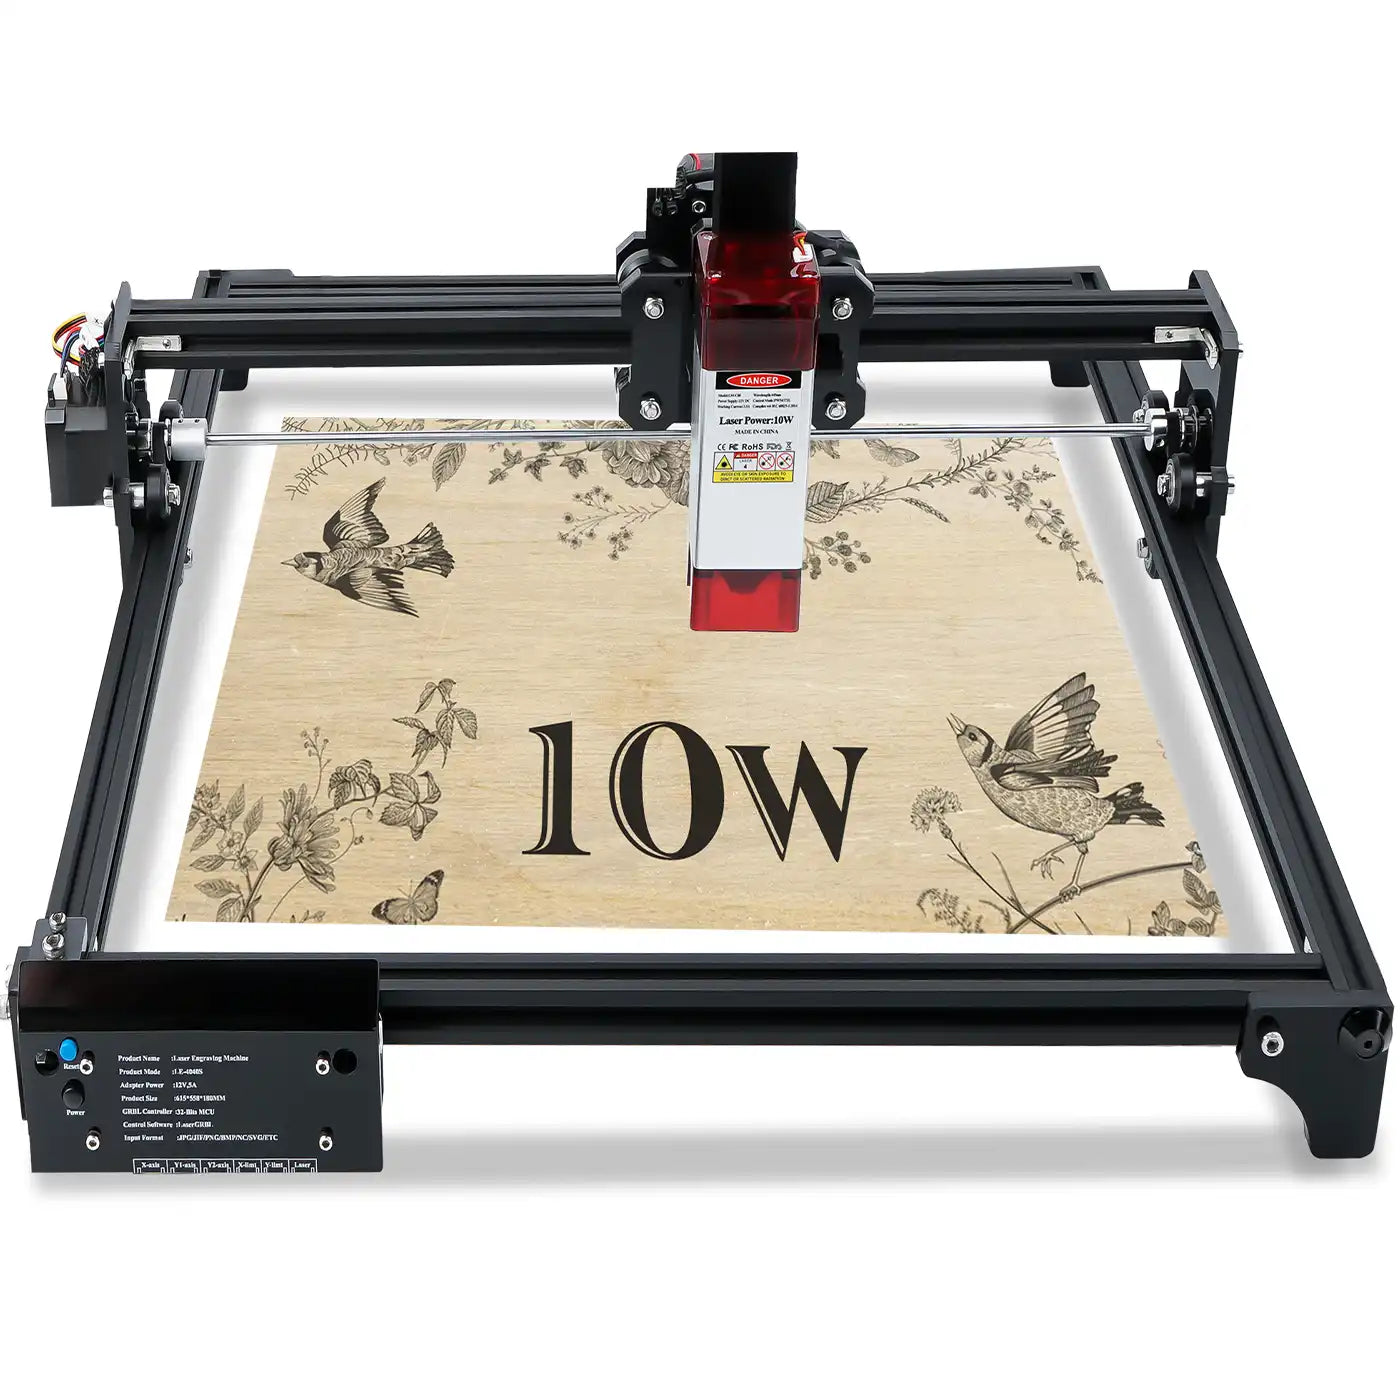 LUNYEE Laser Engraver, 5.5W-10W Compressed Fixed Focus Laser, GRBL Controller Support